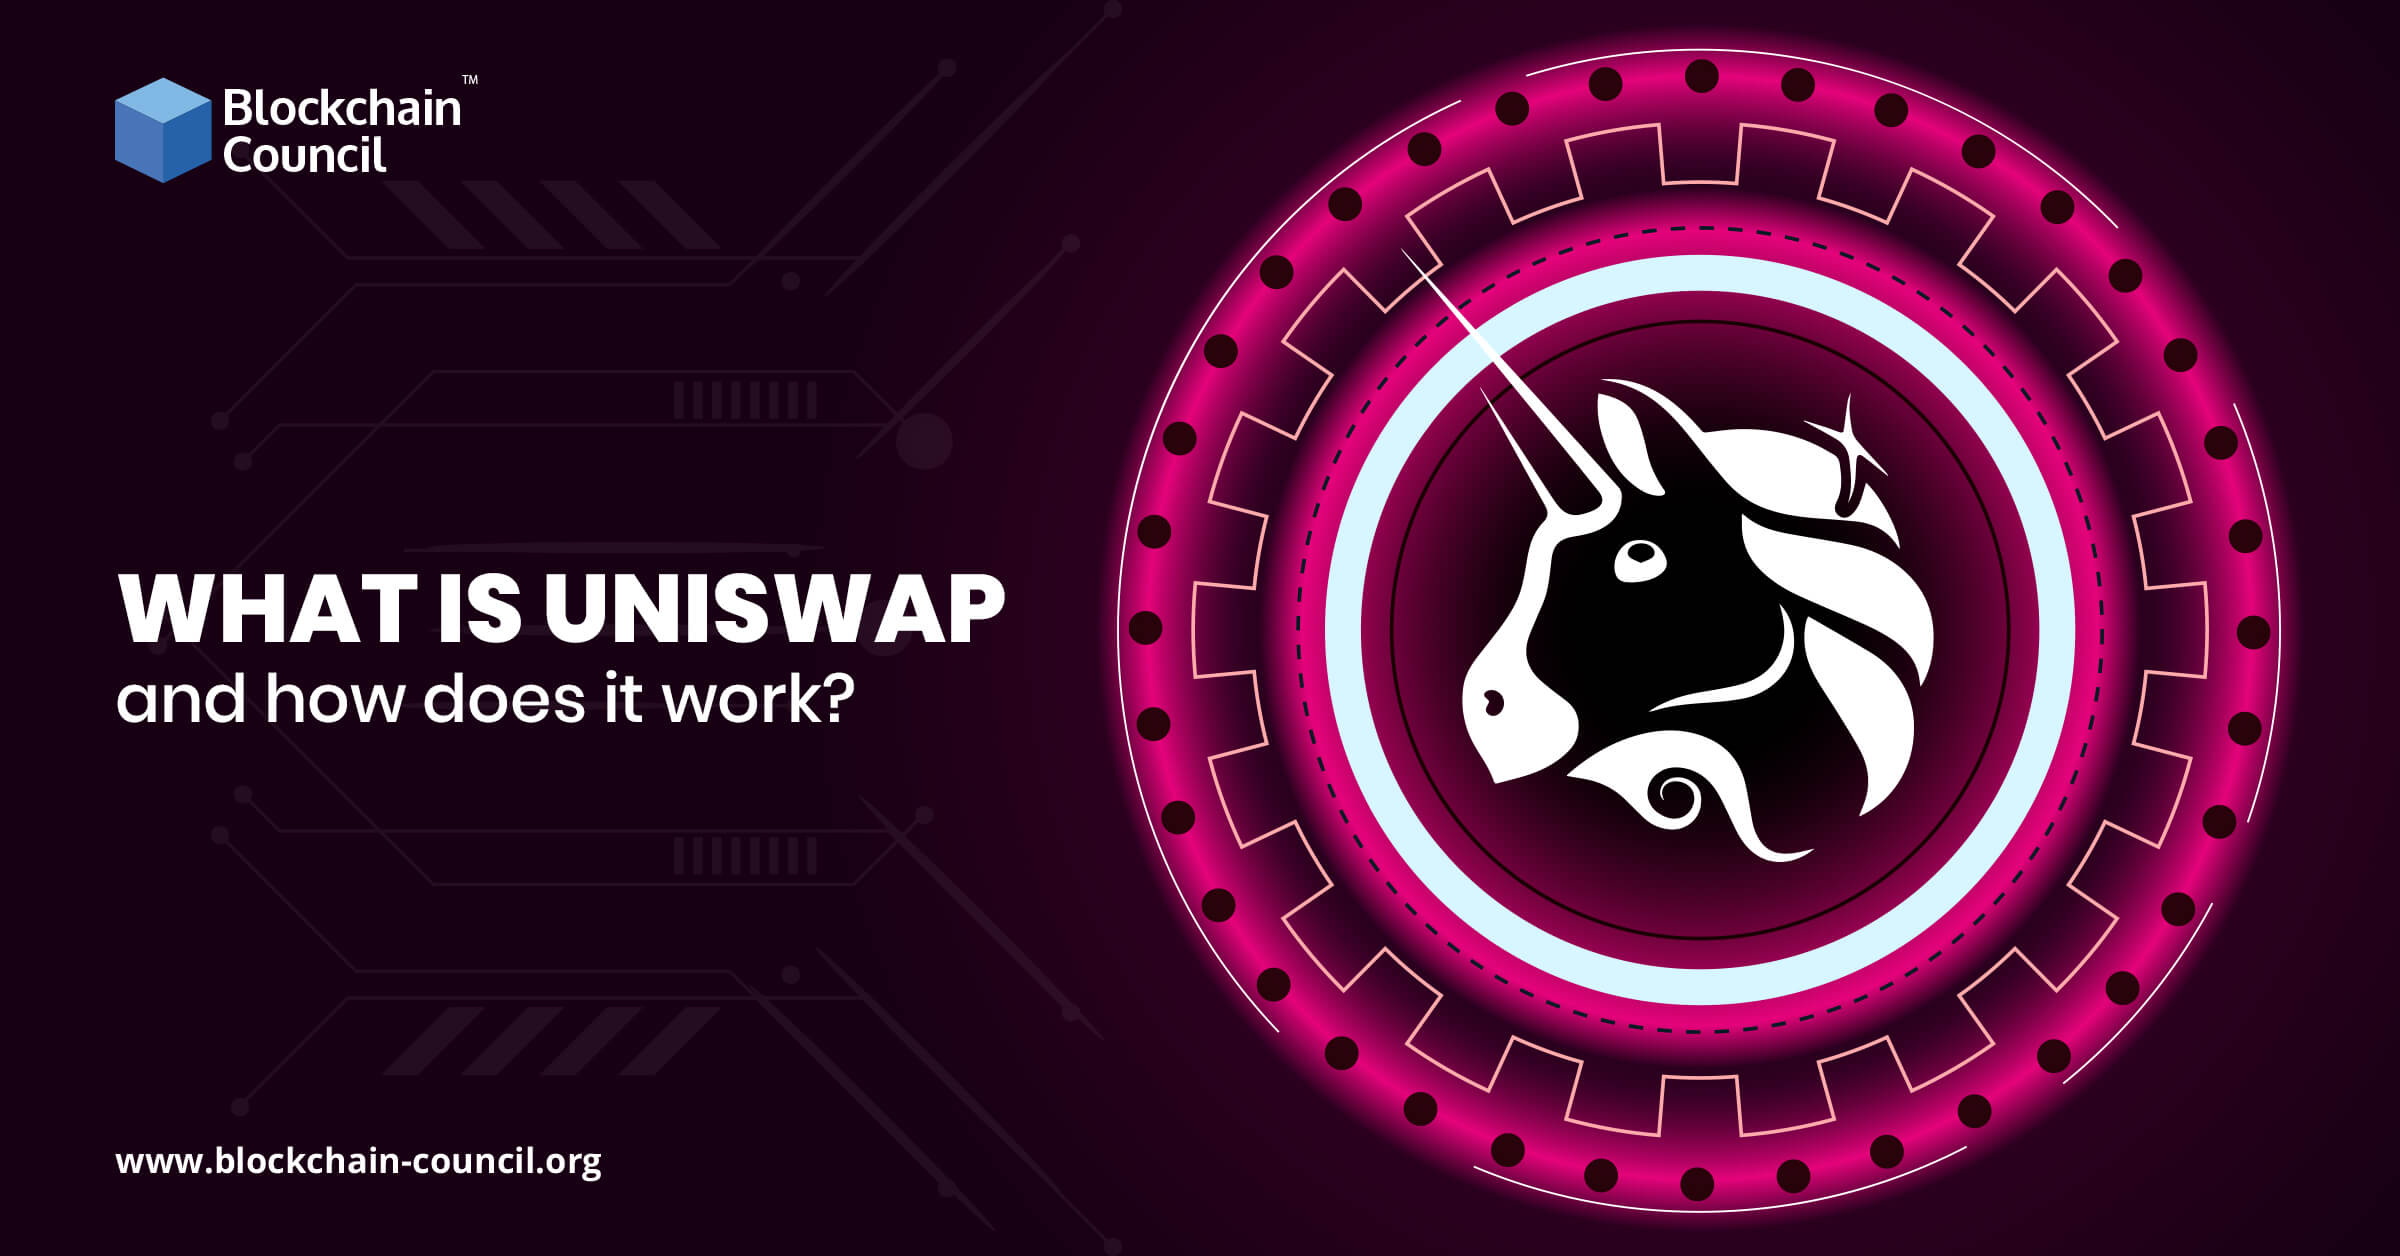 What is Uniswap (UNI), and how does it work? - Blockchain Council